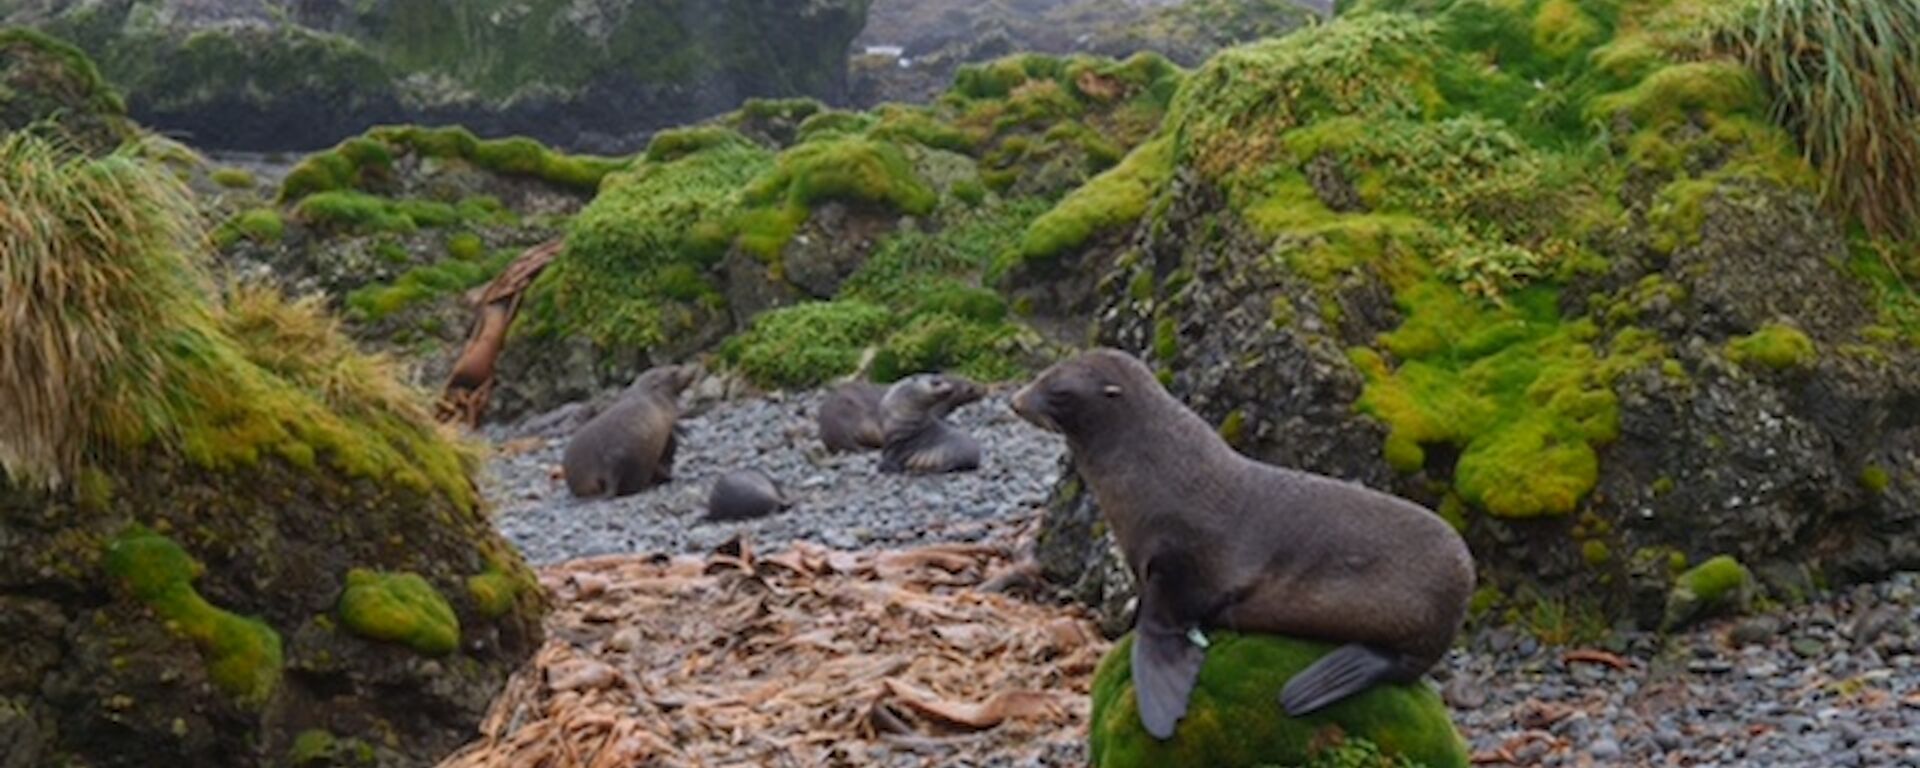 A seal sits on a rocky path with green tussocks and the sea behind it.